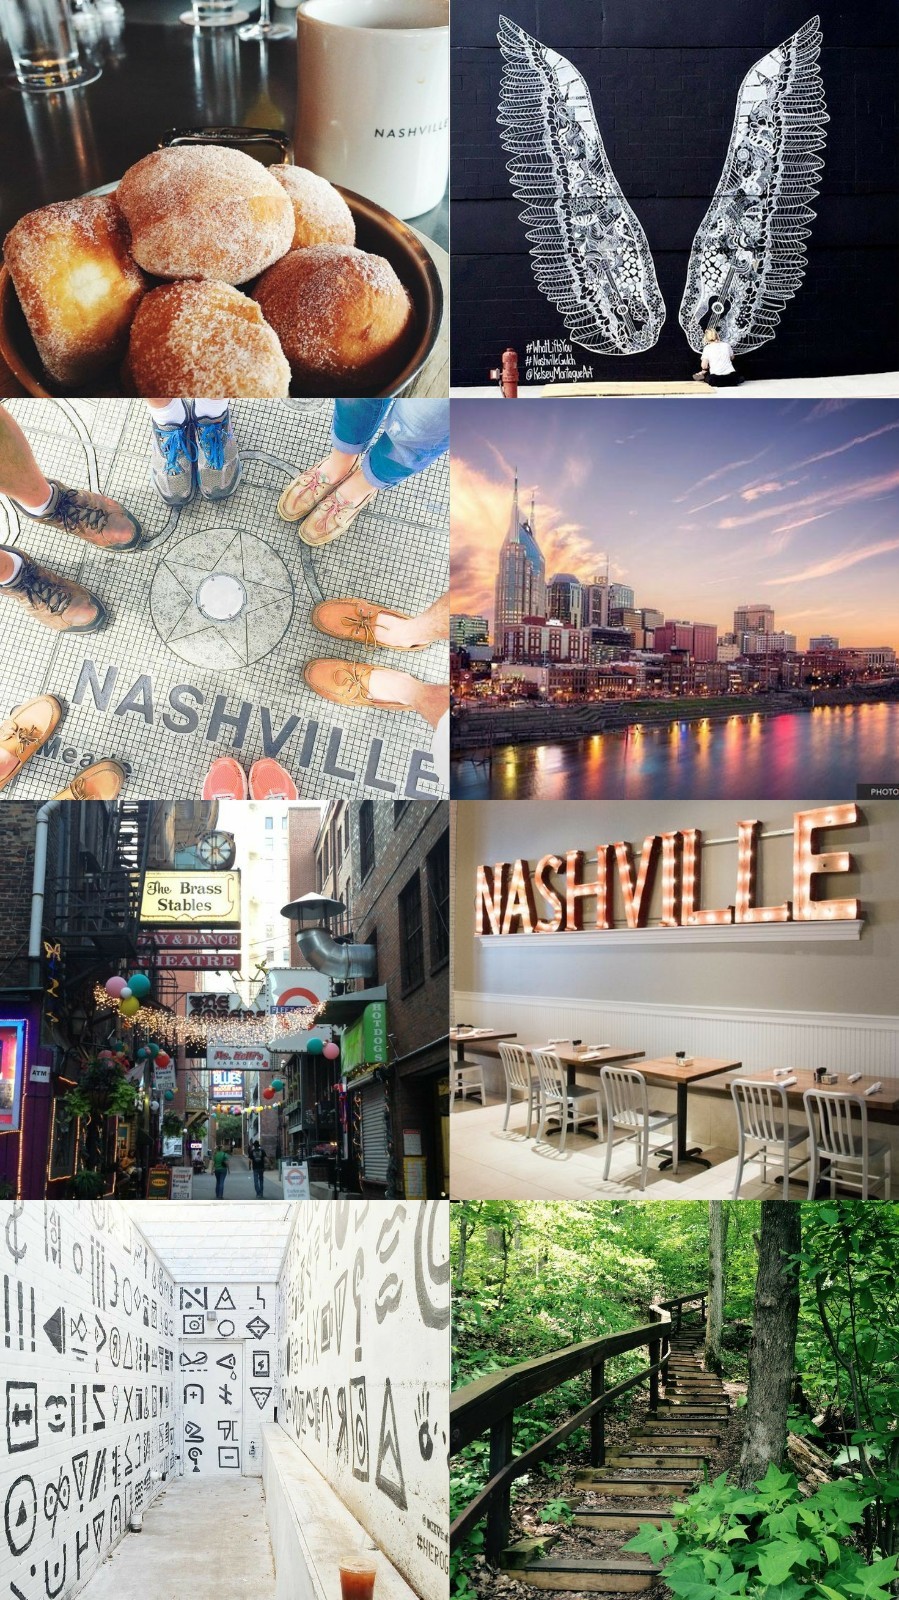 Could You Make A Wallpaper Of Nashville Like A Cool - Collage - HD Wallpaper 